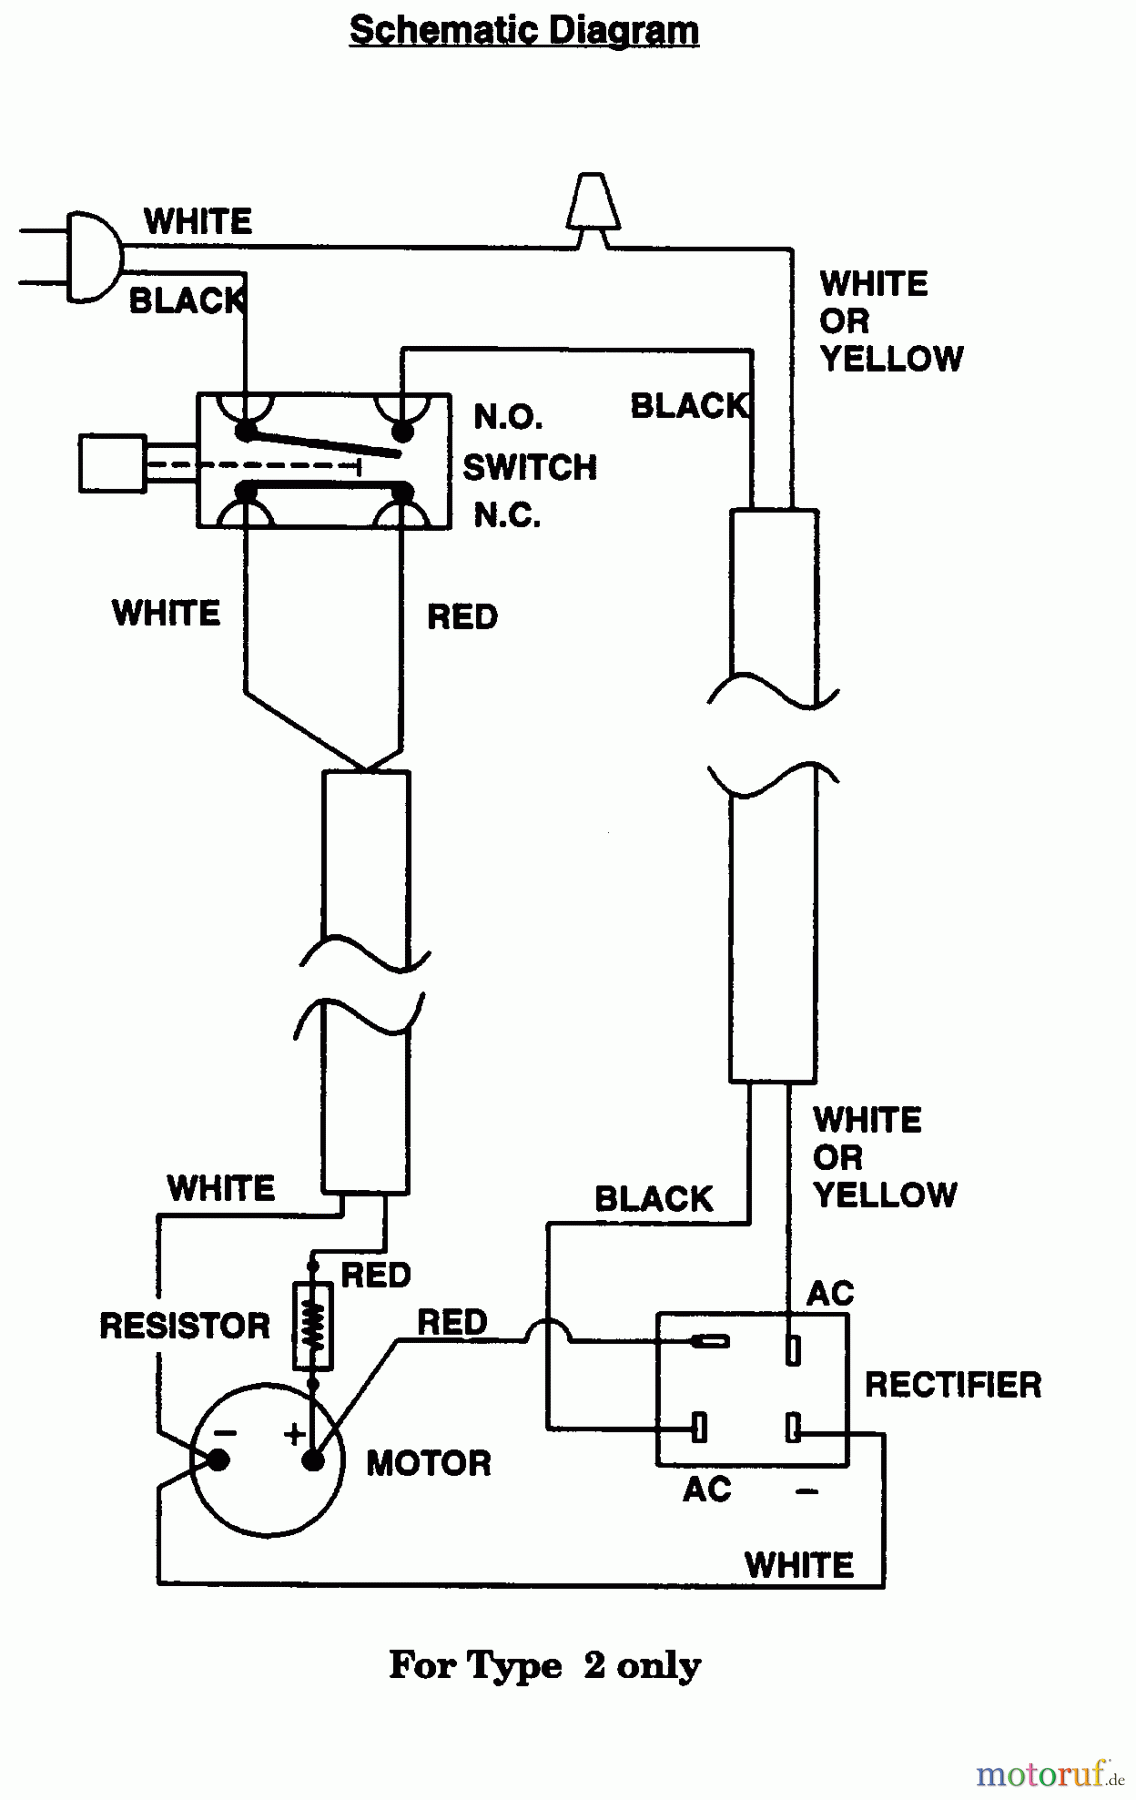  Poulan / Weed Eater Kantenschneider E150BT - Weed Eater Electric Edger SCHEMATIC DIAGRAM - TYPE 2 ONLY